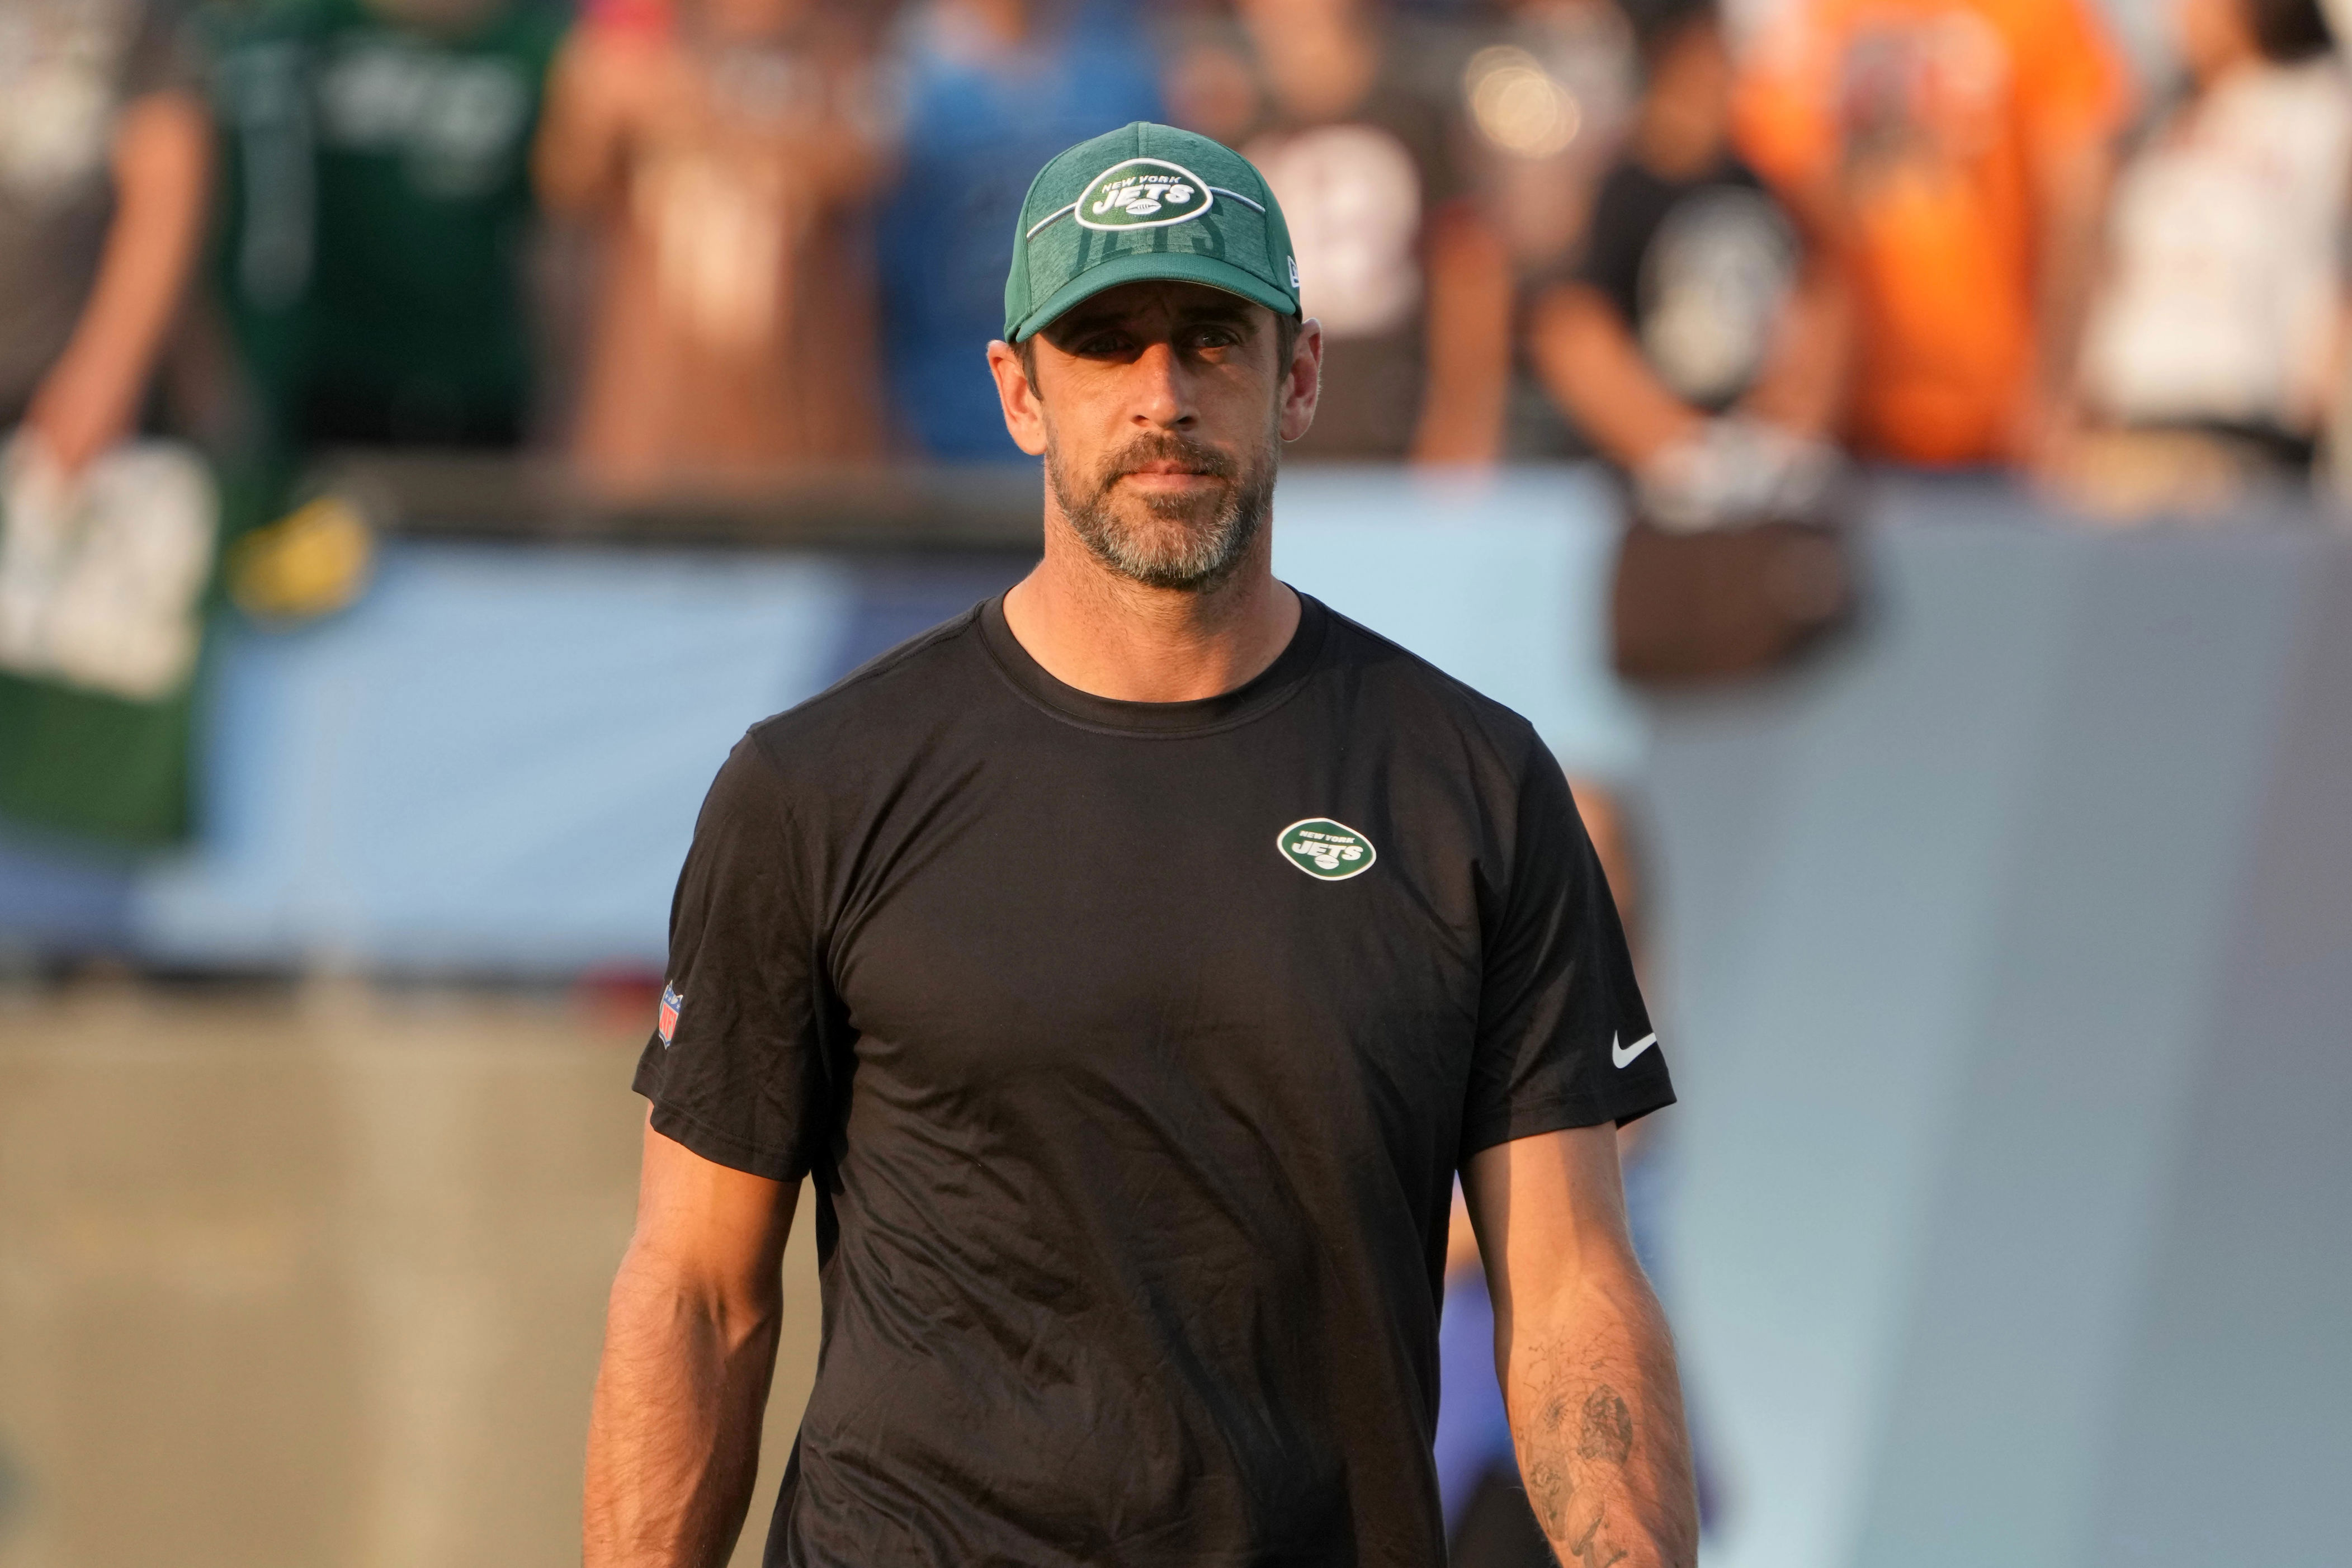 Browns unlikely to see Jets QB Aaron Rodgers in Week 17, per report